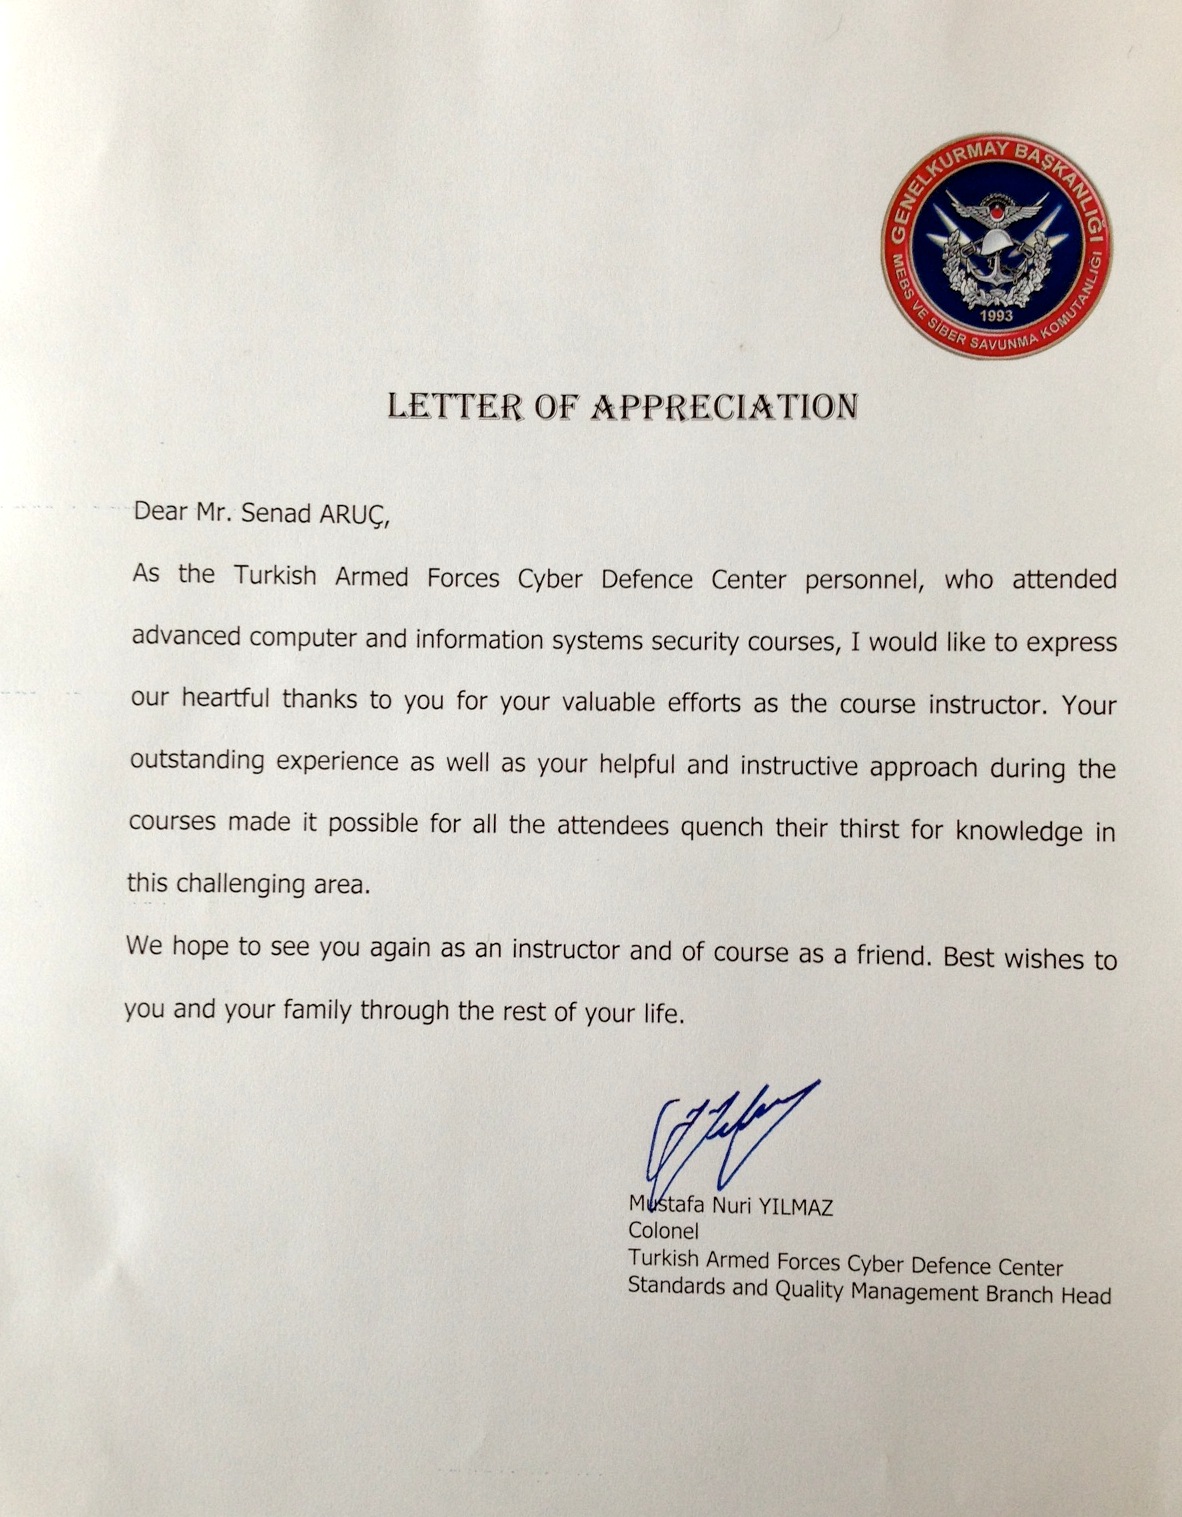 The most important APPRECIATION letter that i have received during my carrier from Turkish Armed Forces – Turkish General Stuff